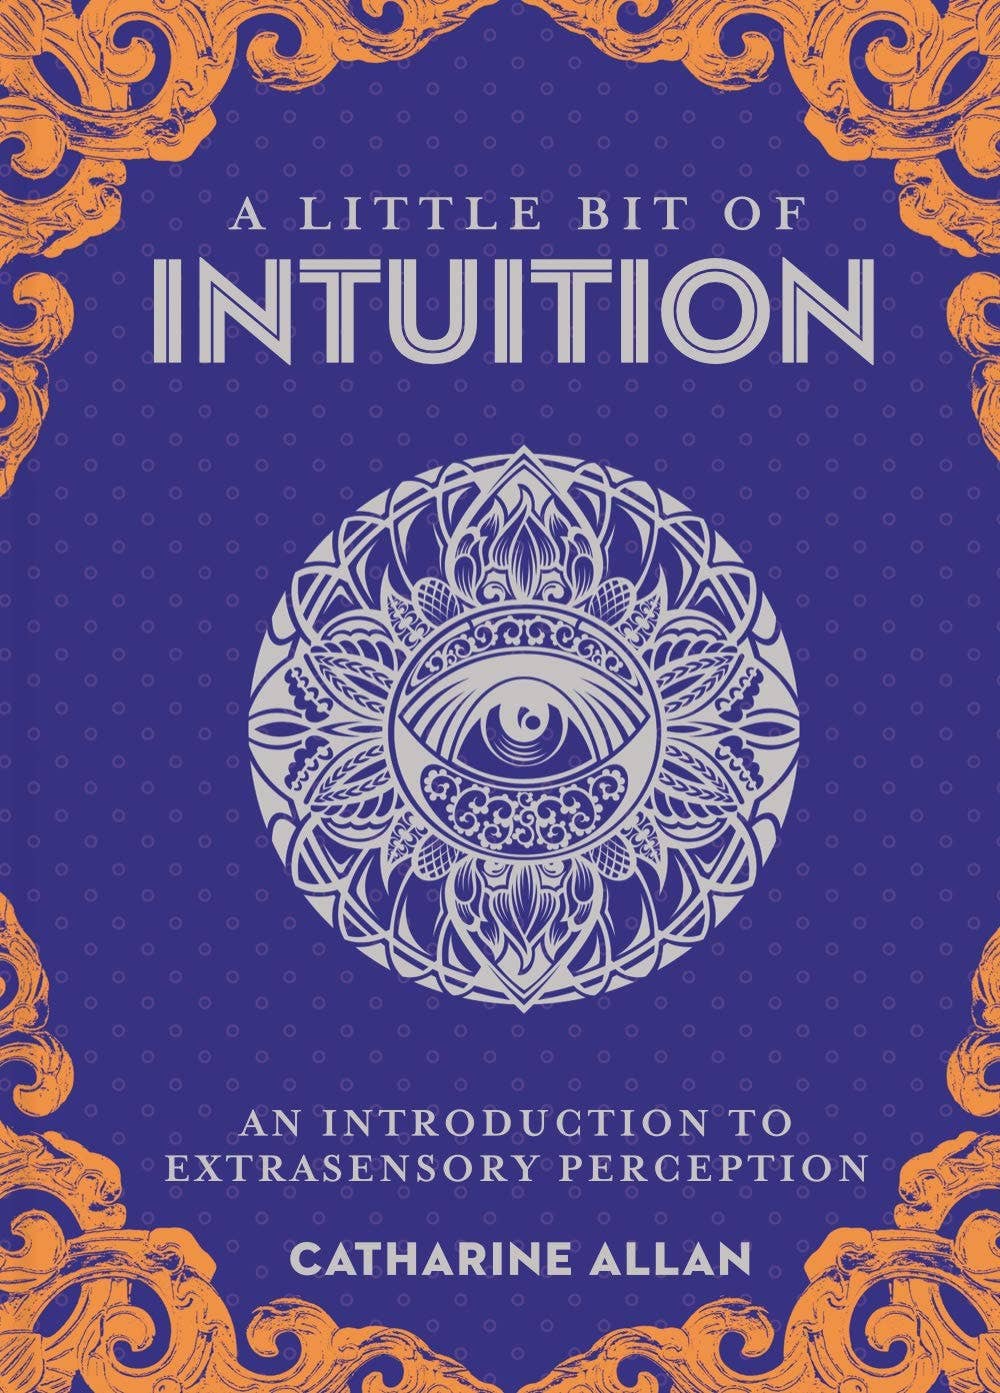 A Little Bit of Intuition by Catharine Allan - Spiral Circle